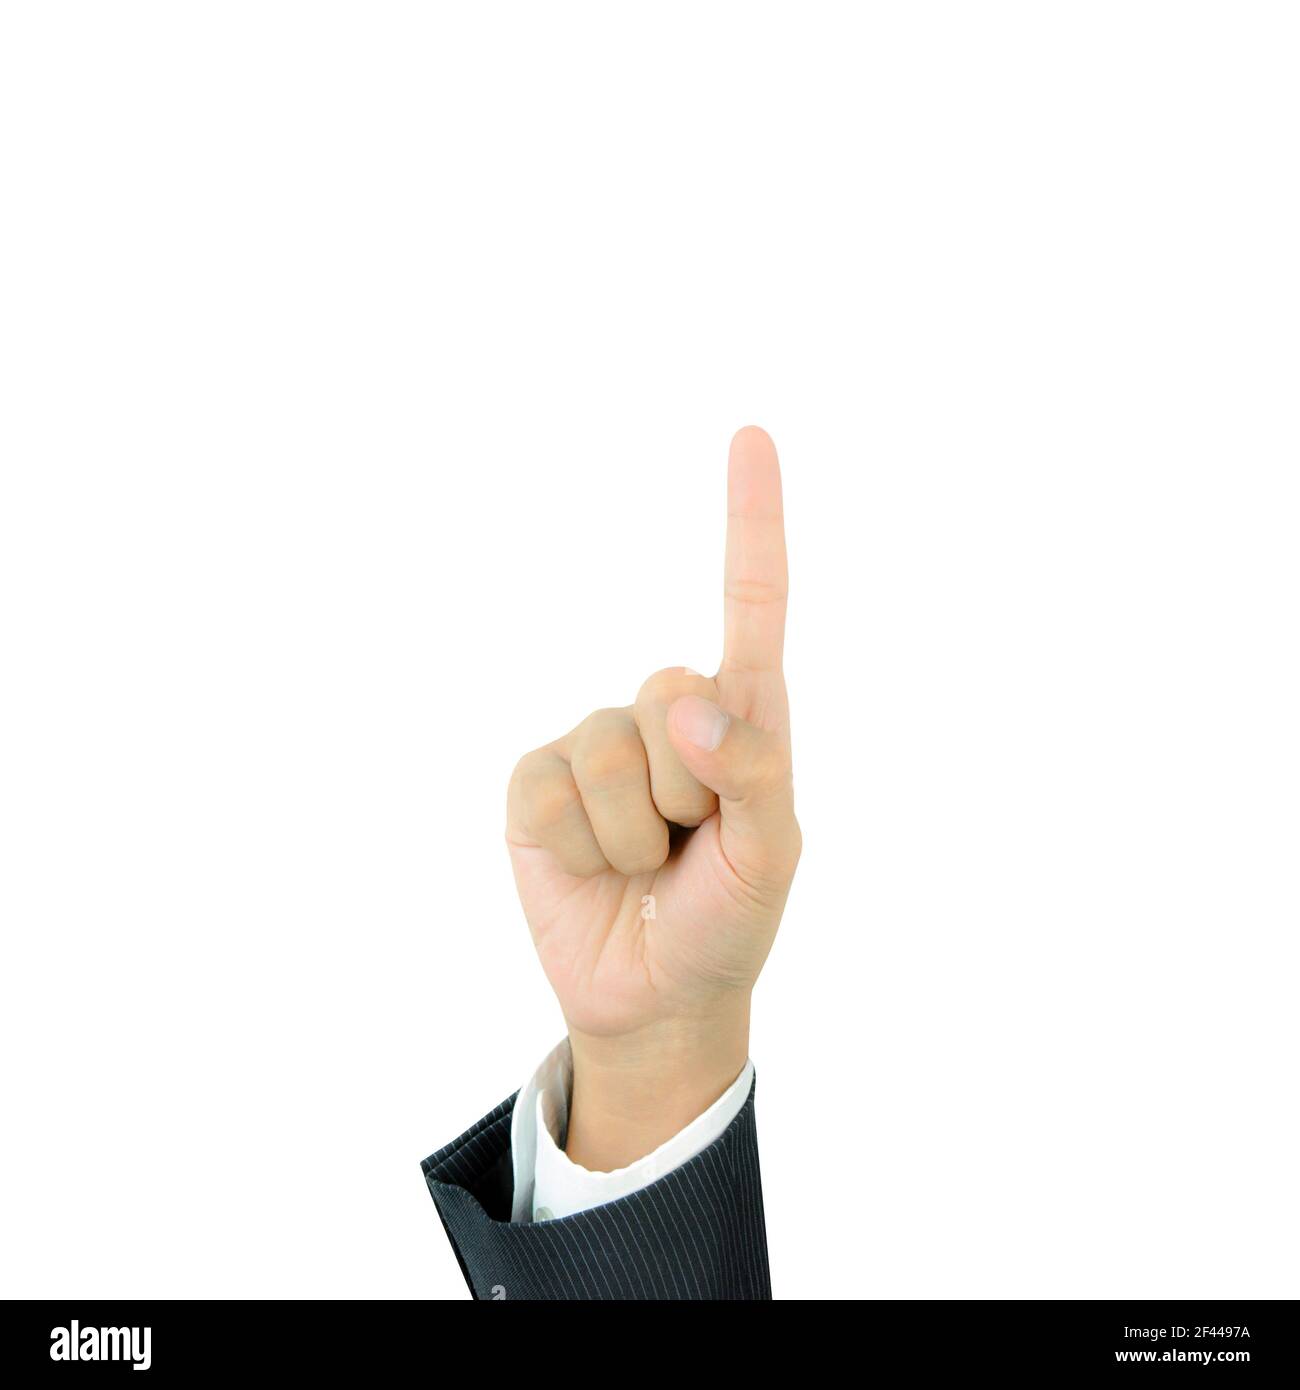 Hand pointing up with index finger - isolated on white background Stock Photo